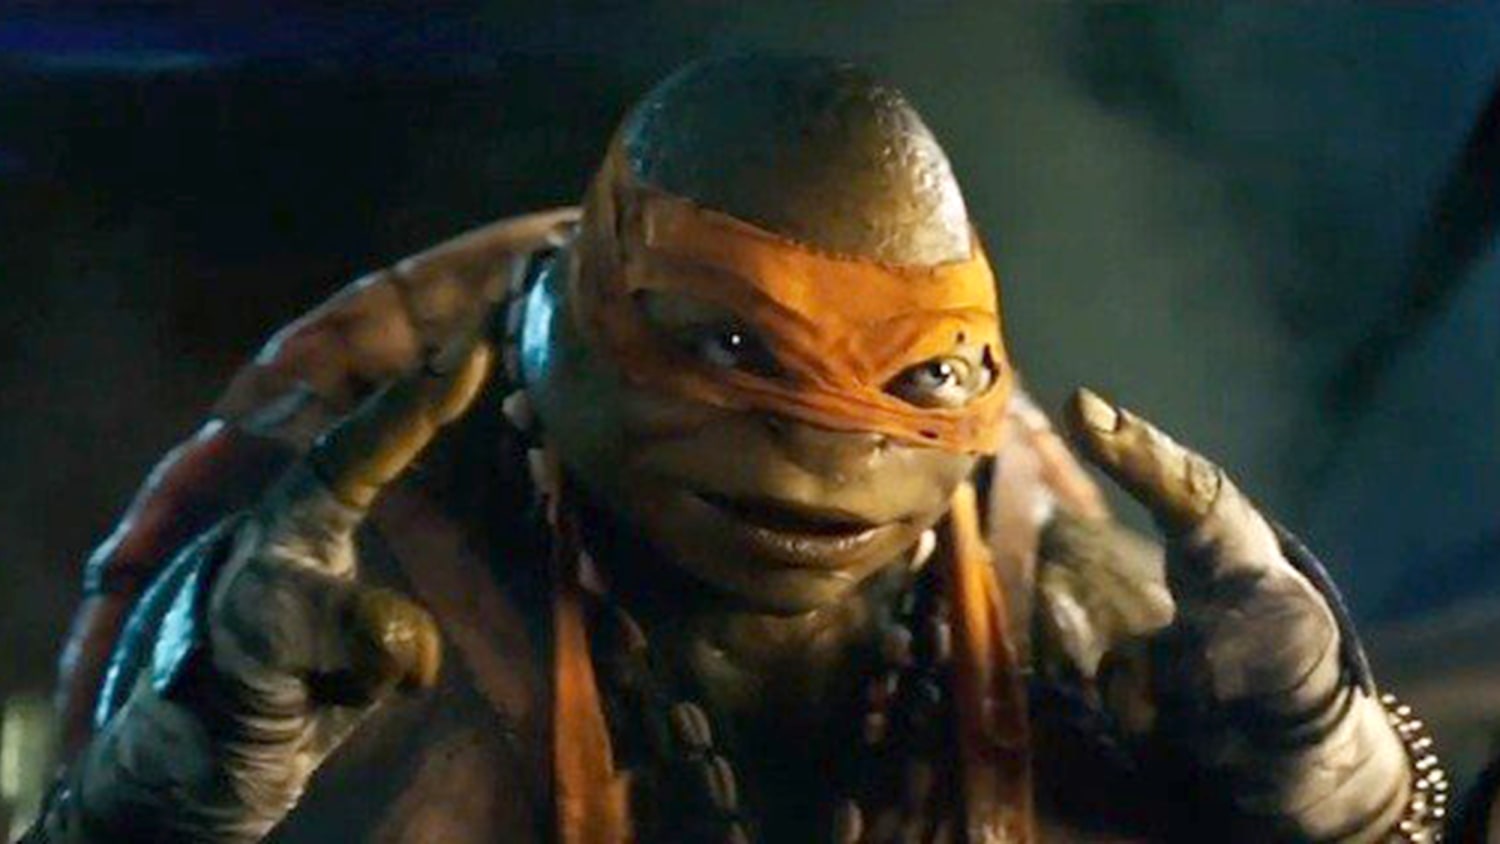 https://media-cldnry.s-nbcnews.com/image/upload/t_fit-1500w,f_auto,q_auto:best/streams/2014/May/140501/2D274905746480-today-TMNT-140501-01.jpg